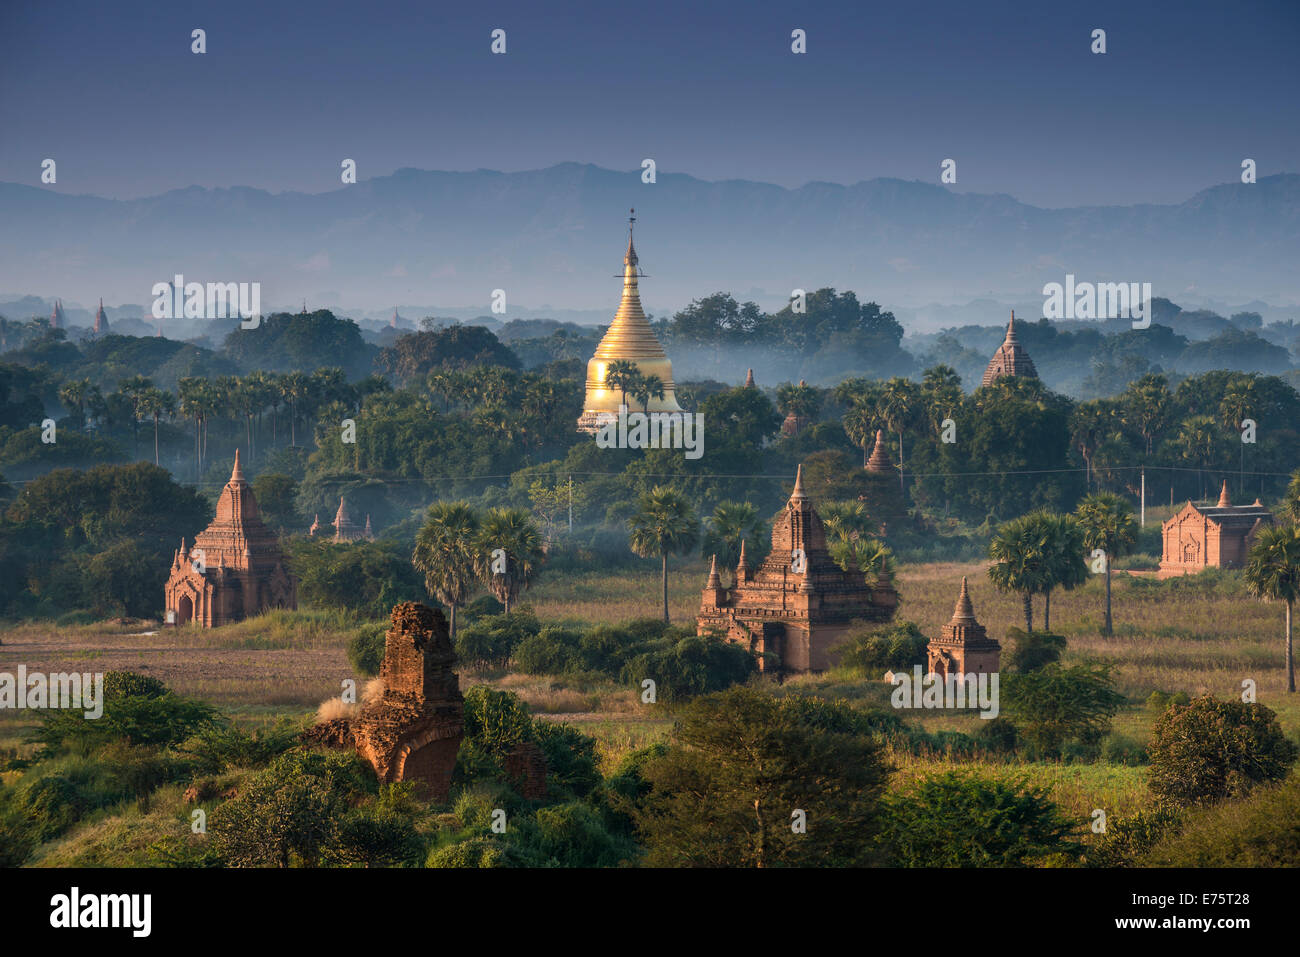 Temples, stupas and pagodas in the temple complex of the Plateau of Bagan, Mandalay Division, Myanmar or Burma Stock Photo